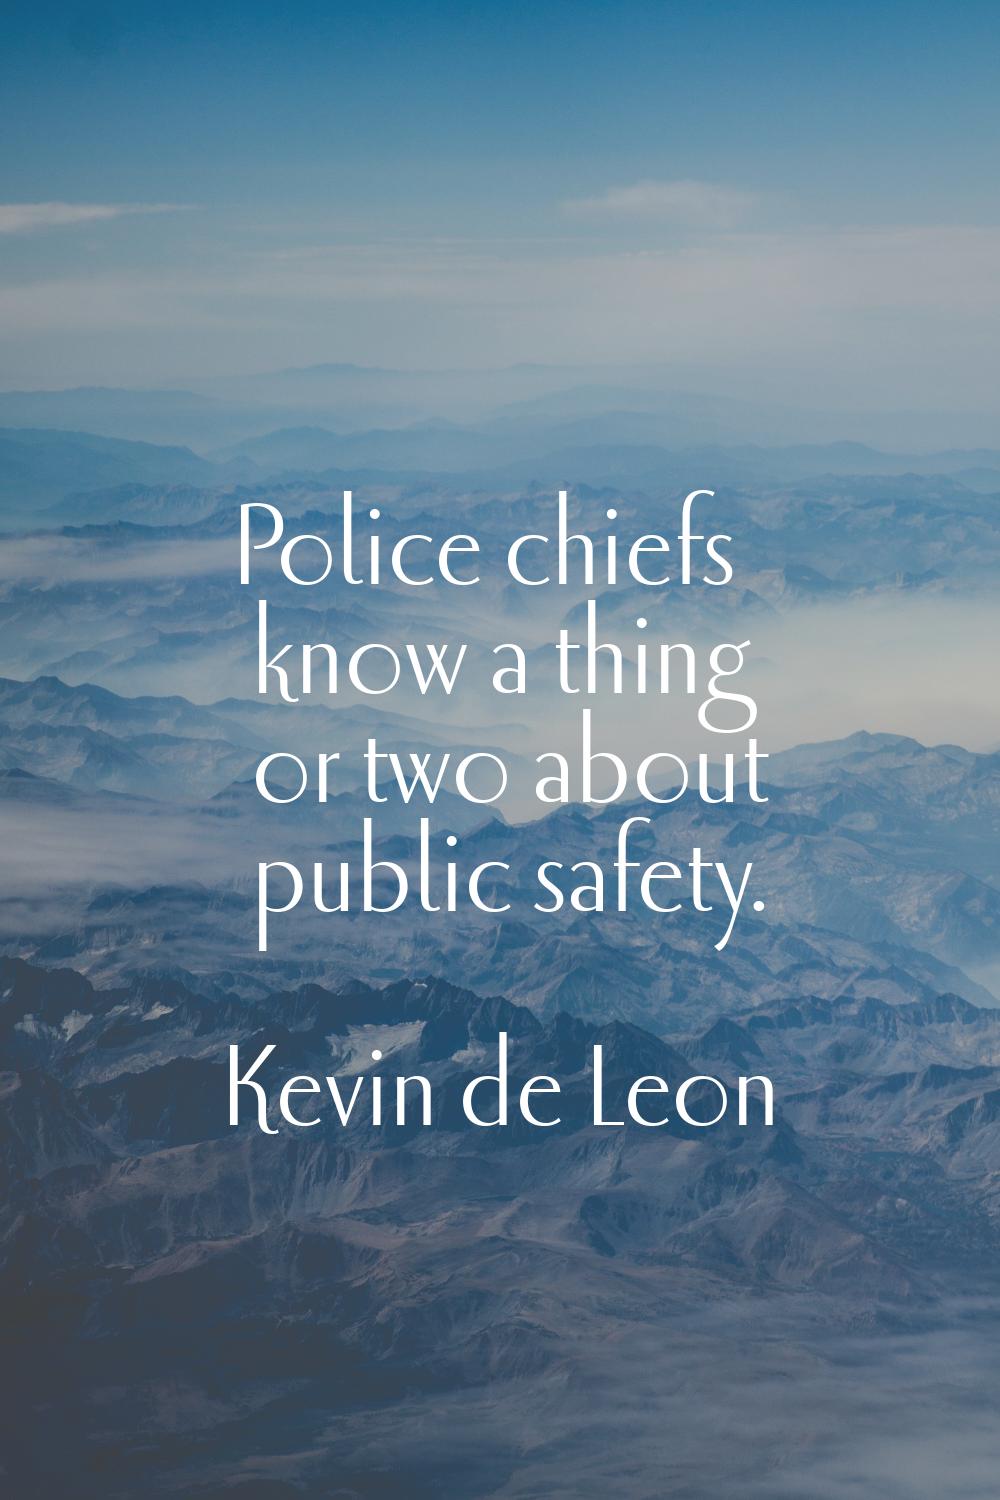 Police chiefs know a thing or two about public safety.